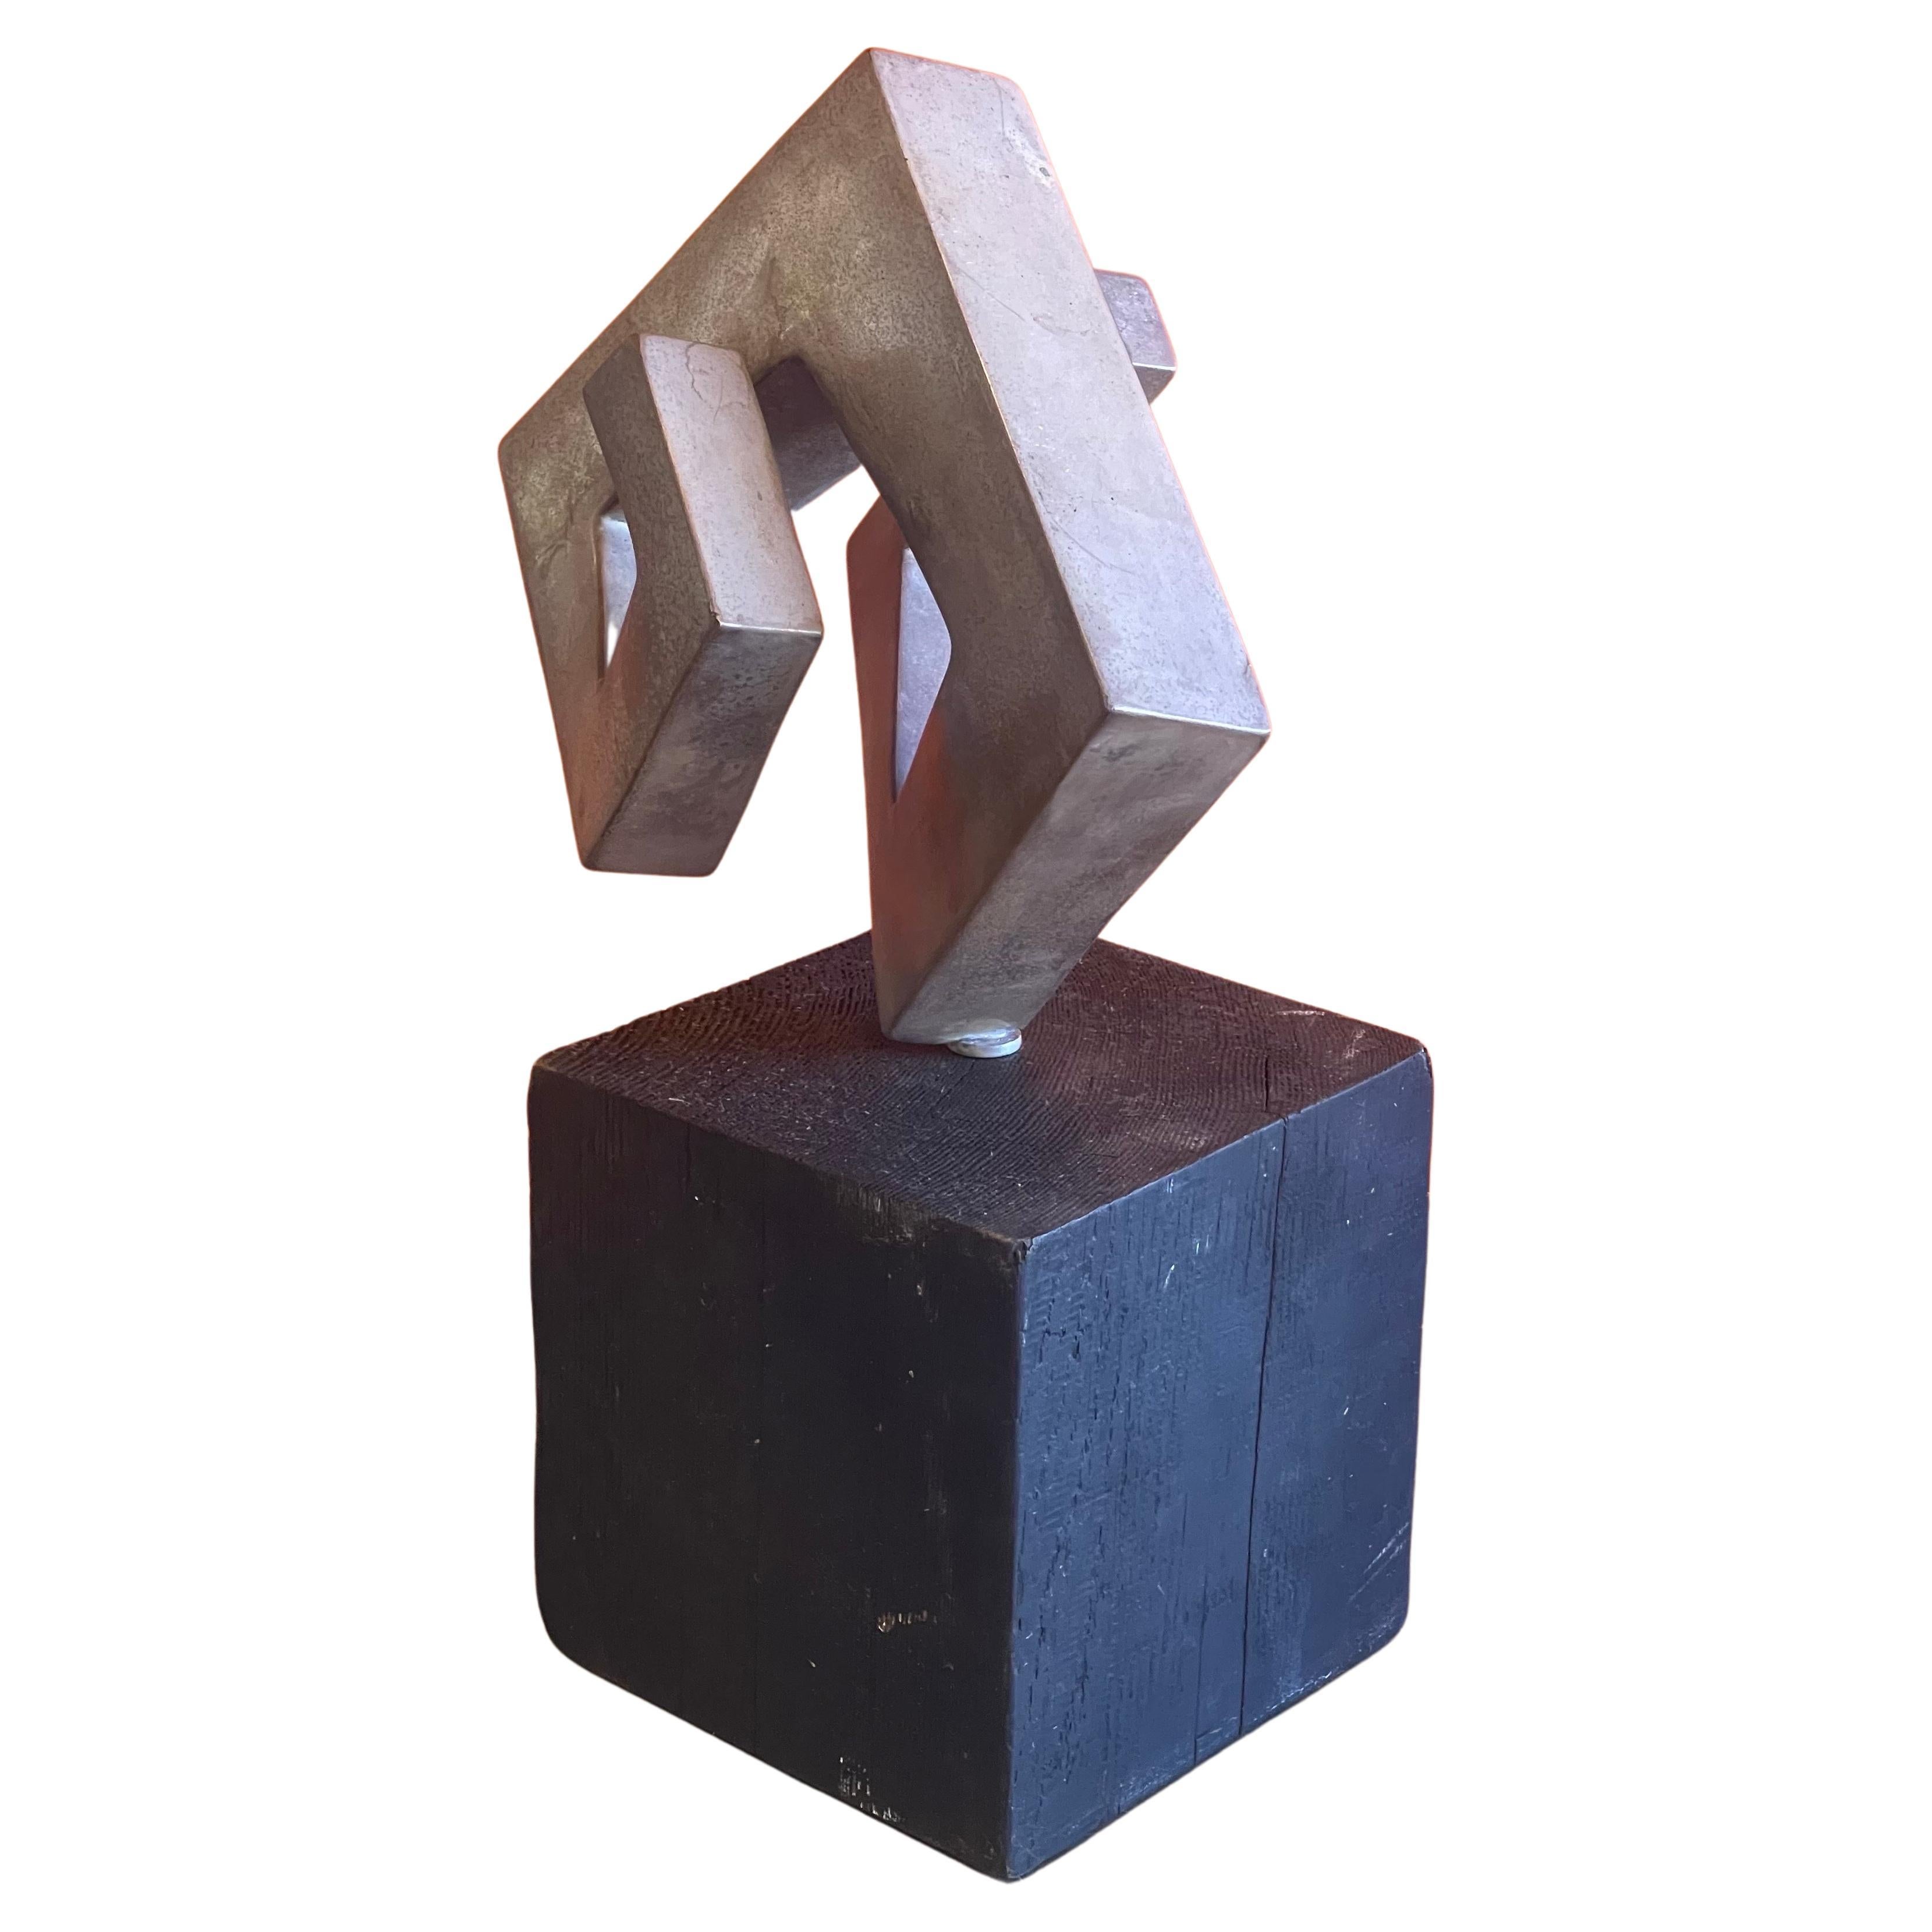 A very cool modernist abstract rotating sculpture on a black wood base, circa 1970s. The sculture appears to be made out of aluminum (not positive - non-magnetic) and can rotate 360 degrees on the base to give the sculpture many different looks; it